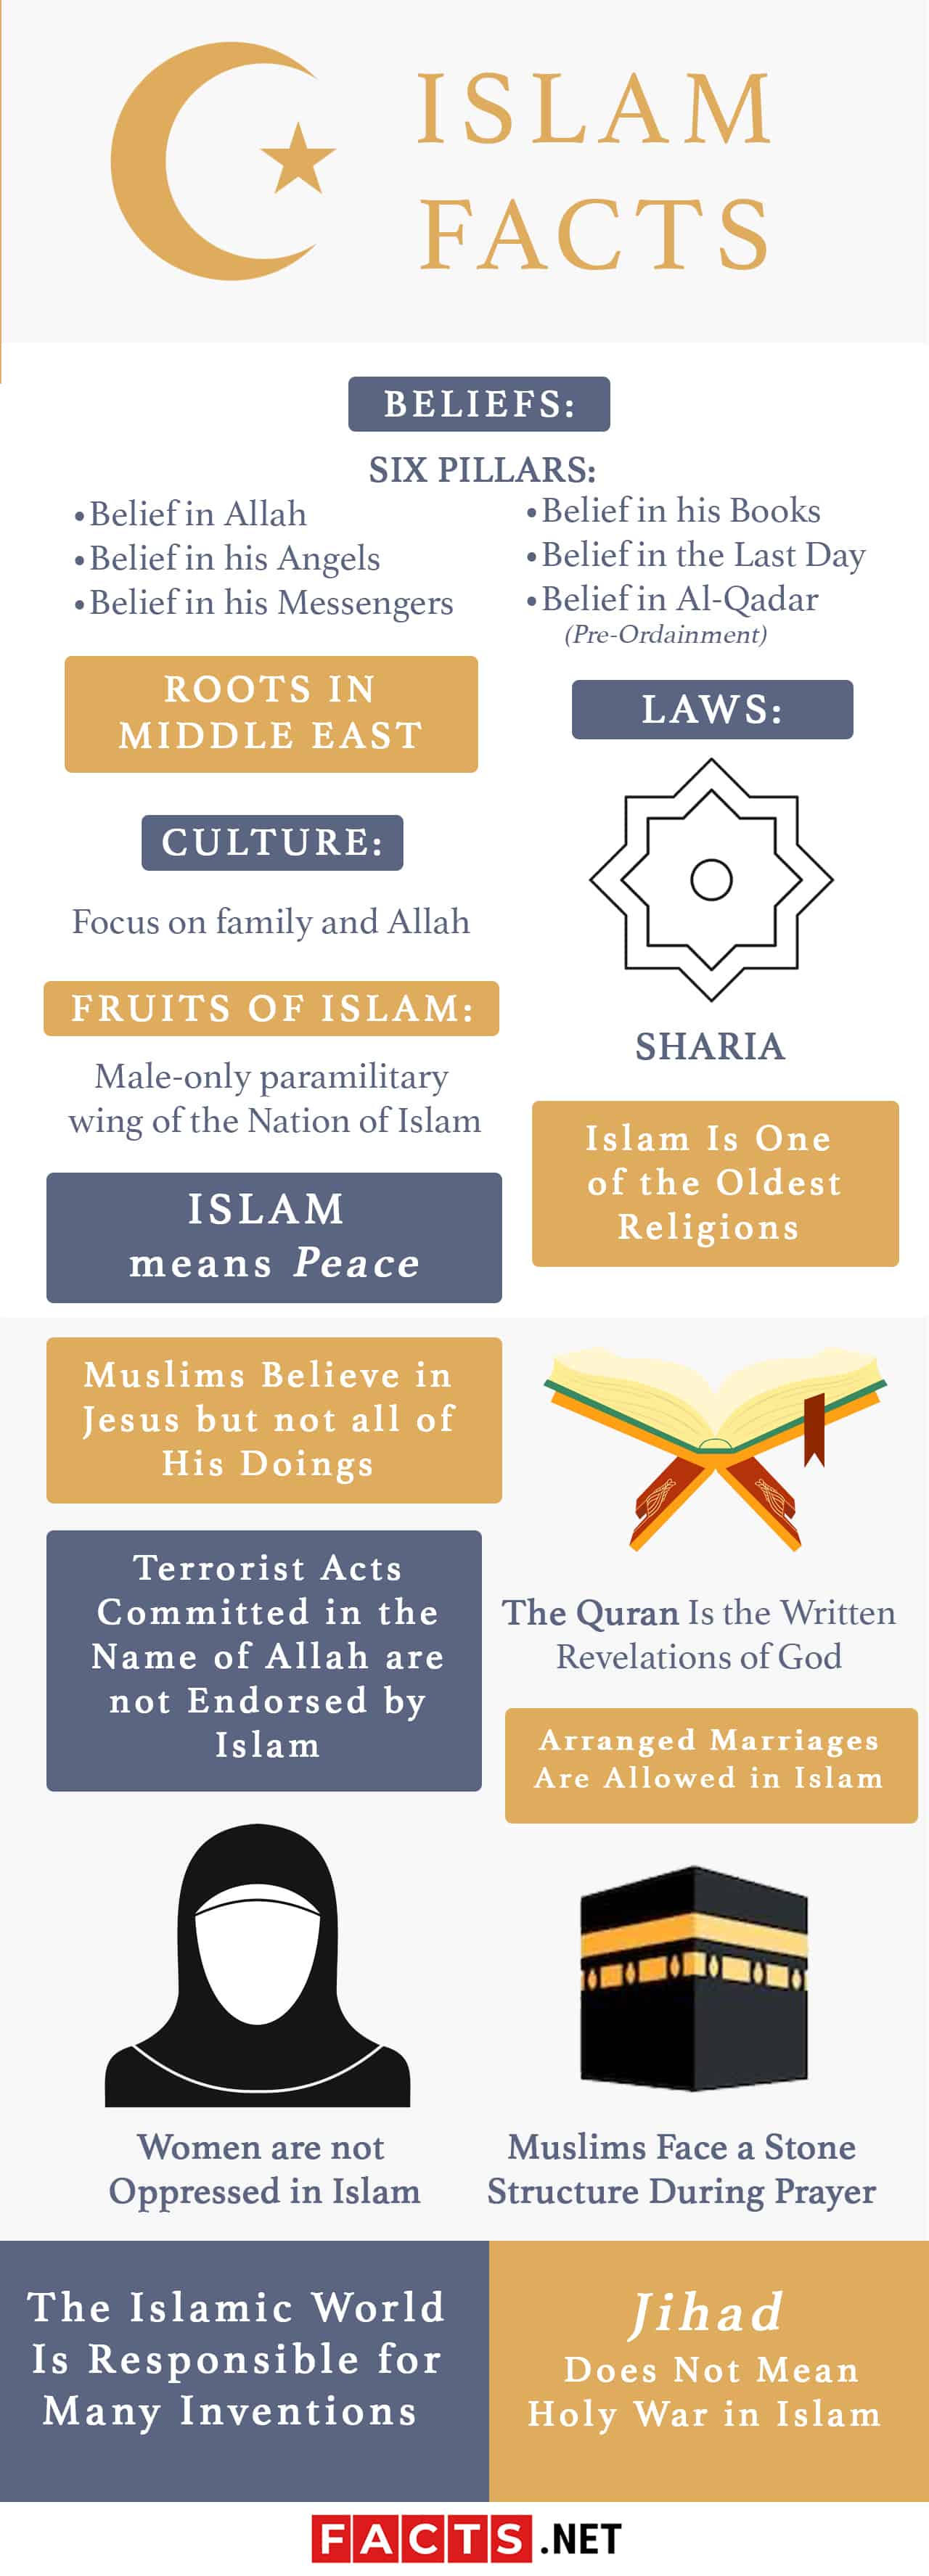 Islam's beliefs, practices, and history